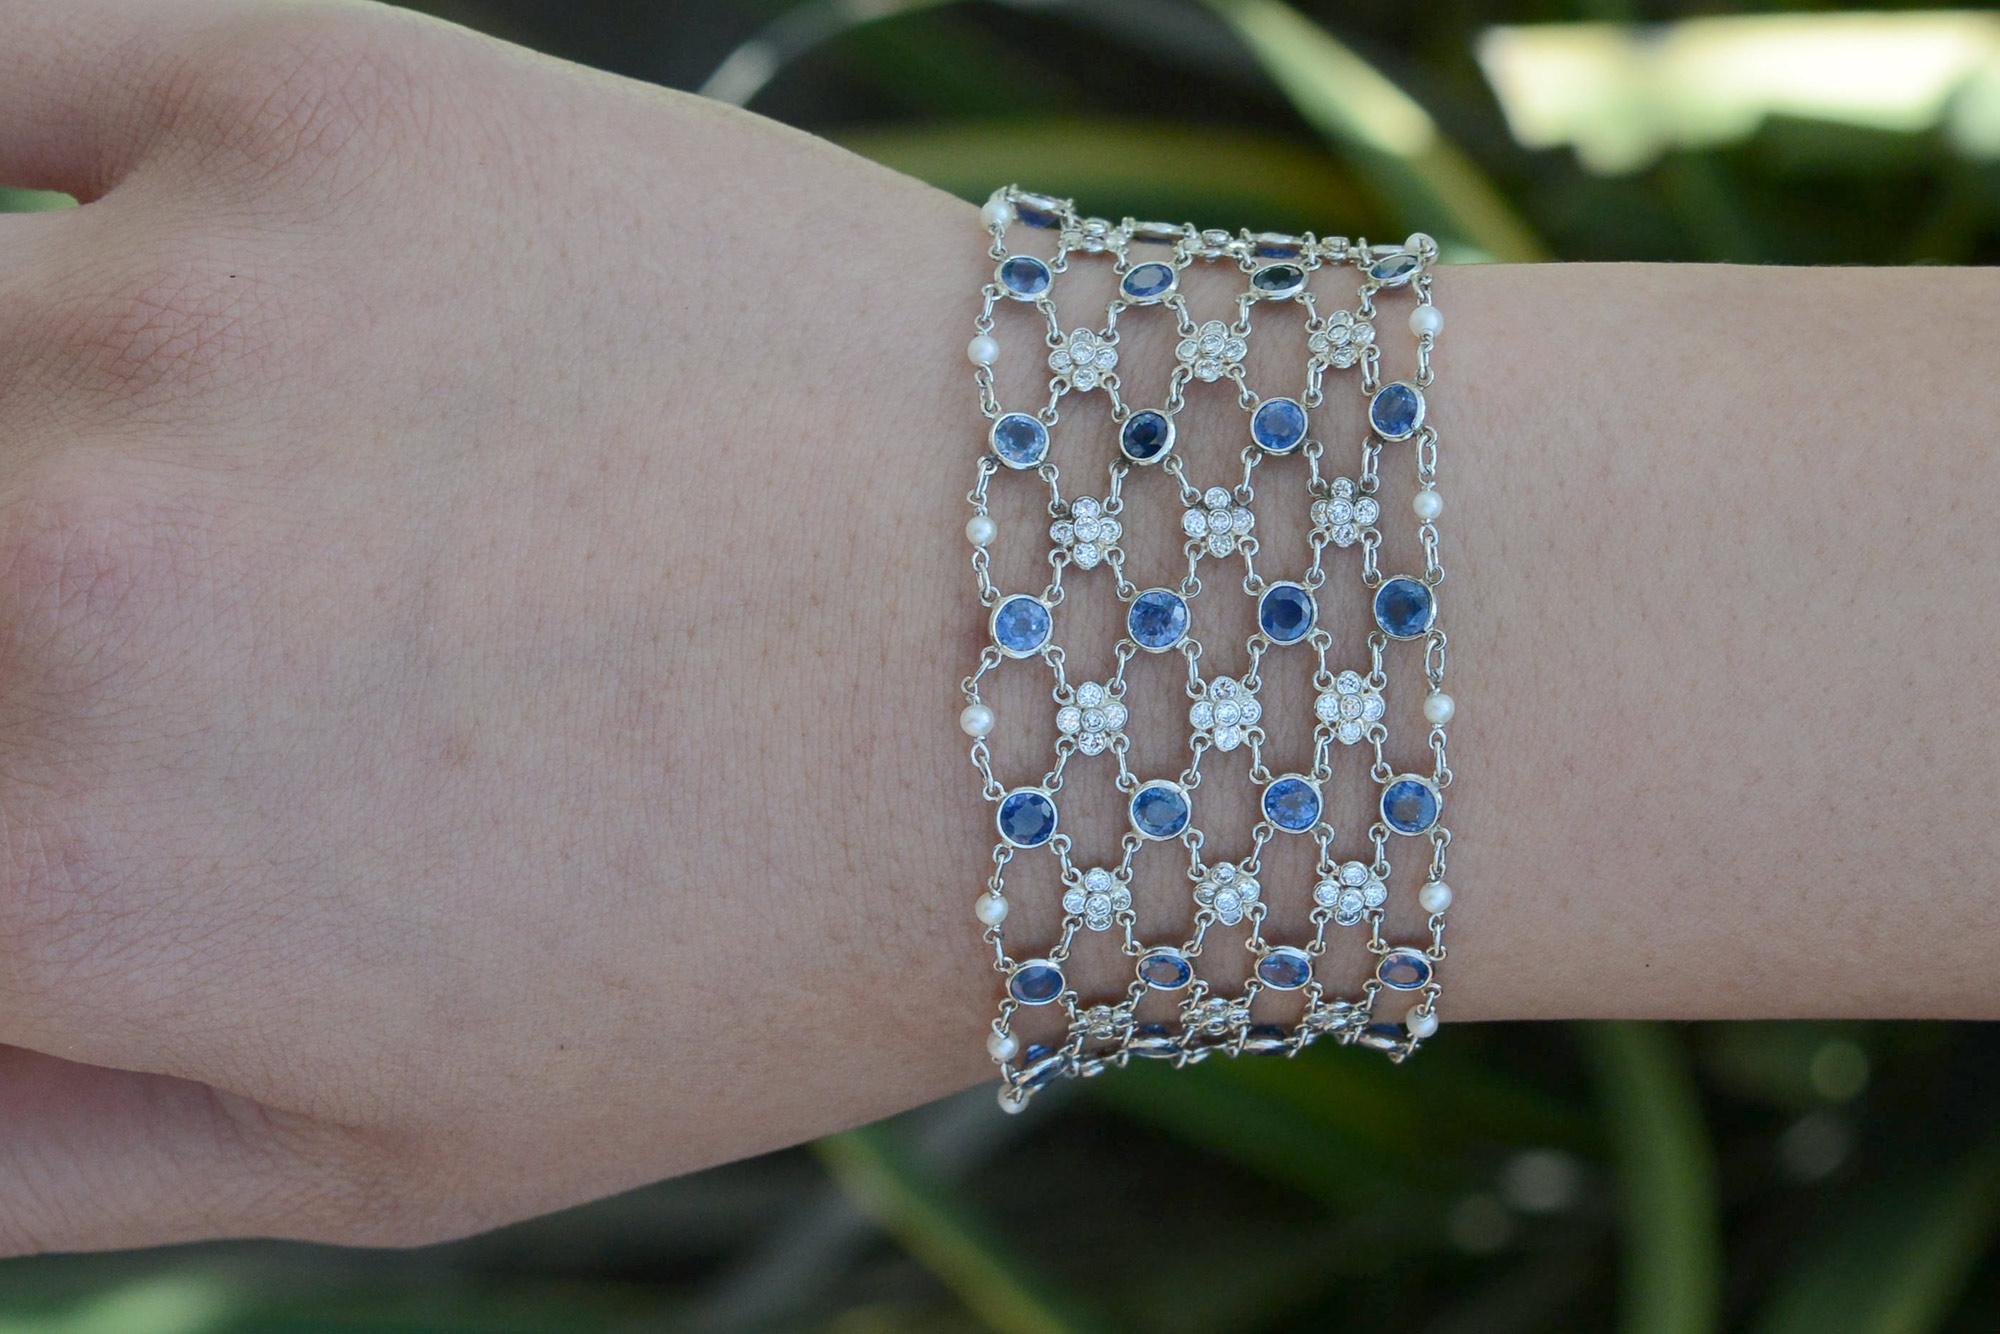 Featuring rows of bright blue sapphires, radiant diamonds, and creamy seed pearls, this platinum mesh bracelet is the epitome of Art Deco bliss. The floral clusters of diamonds stationed between velvety blue sapphires and the dreamy pearls lining